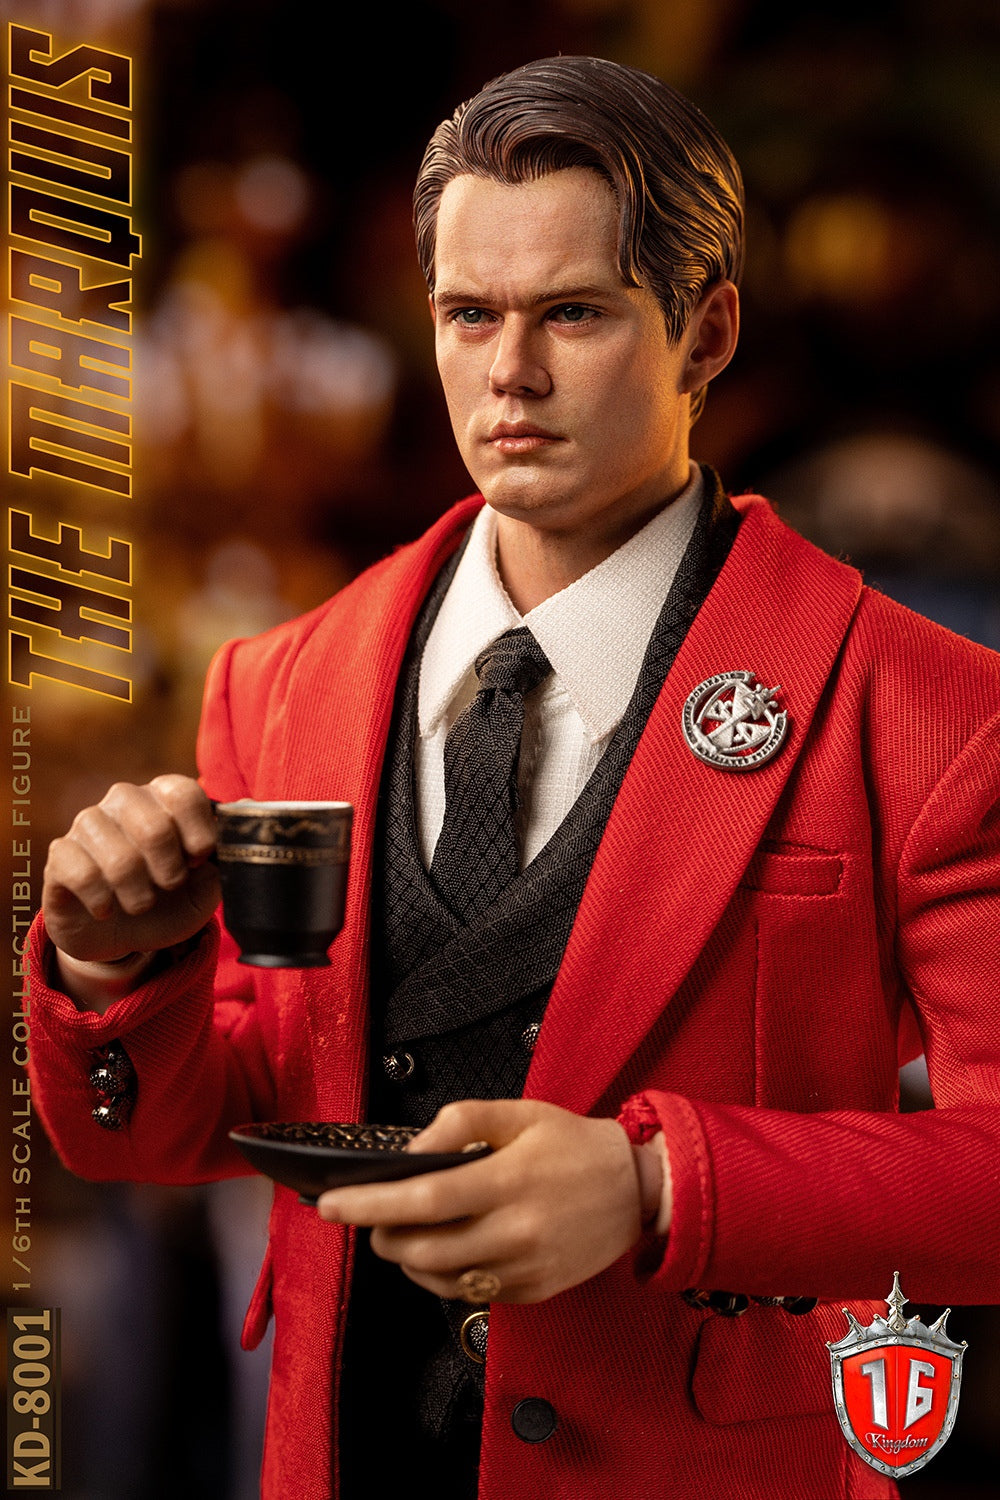 Kingdom - KD-8001 - The Marquis (1/6 Scale) - Marvelous Toys